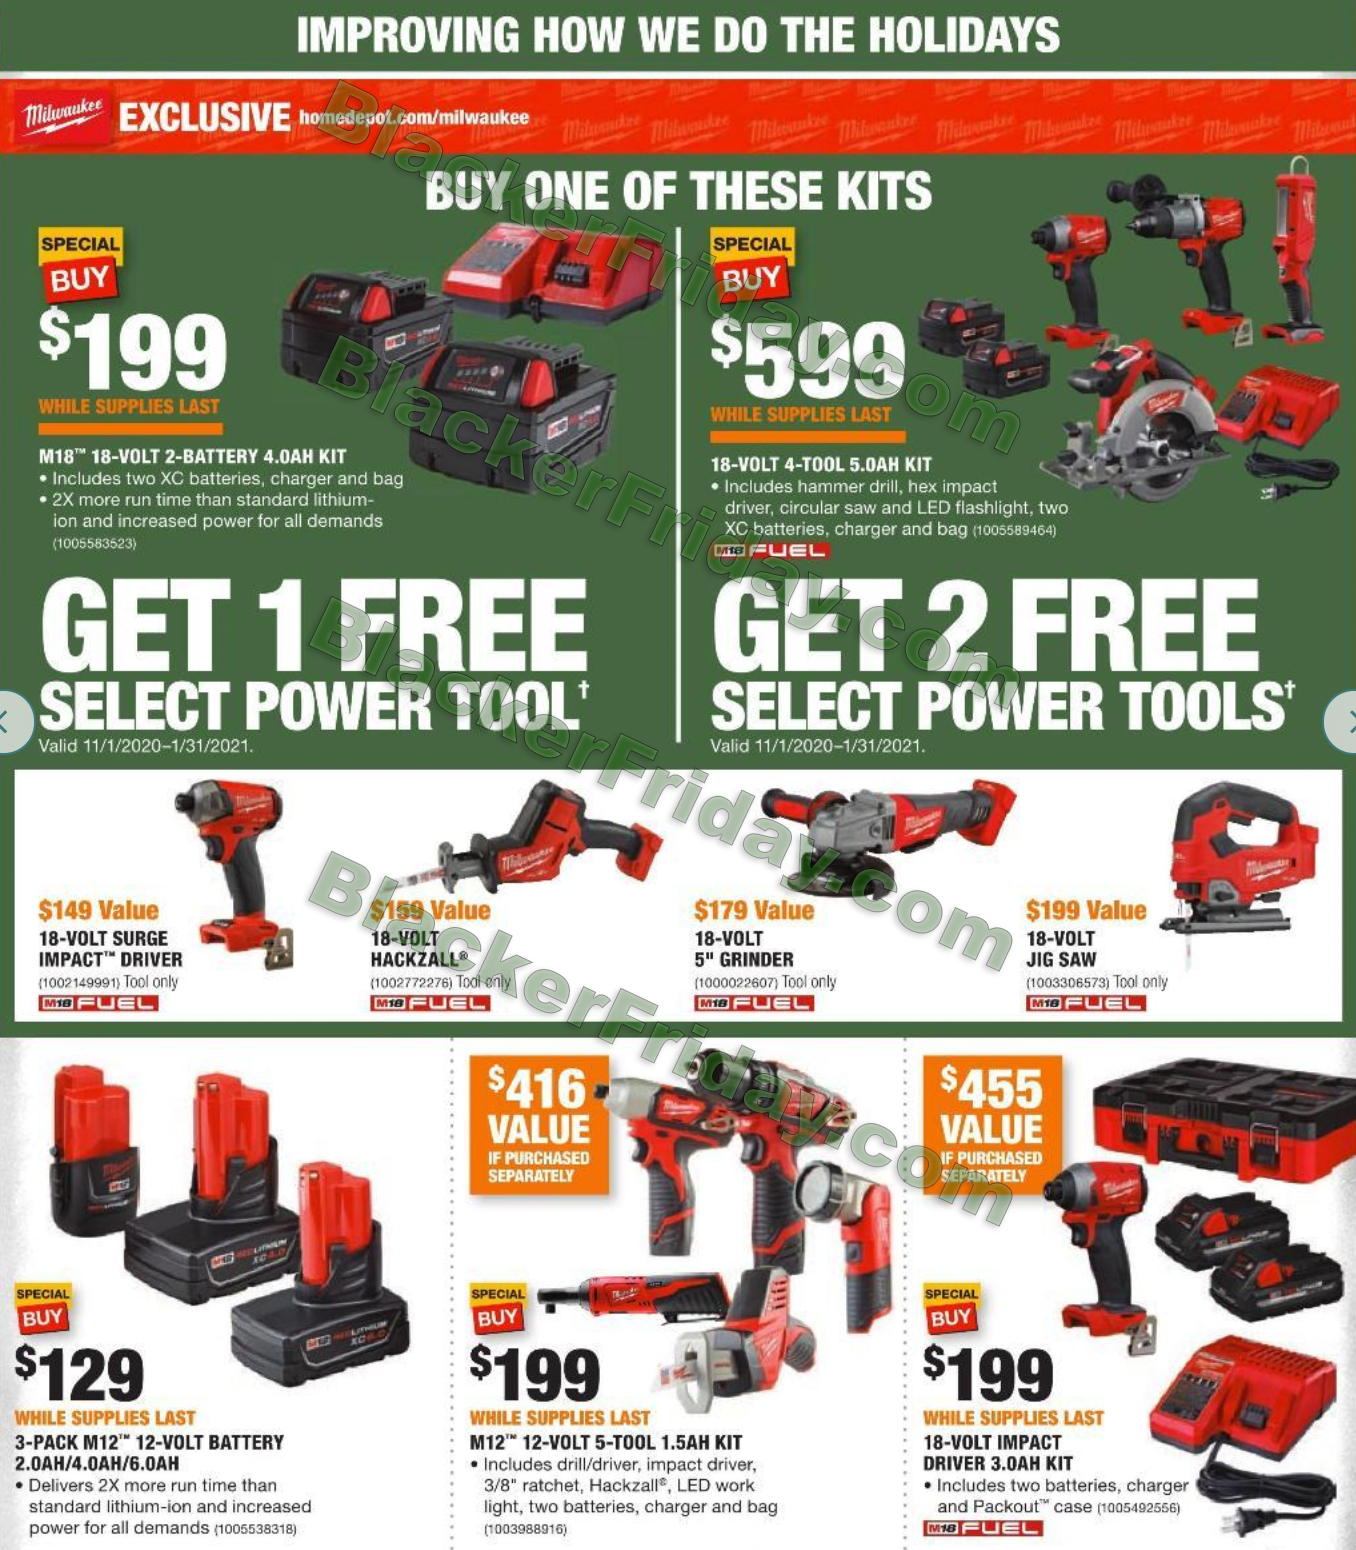 Home Depot Black Friday 2021 Sale What to Expect Blacker Friday